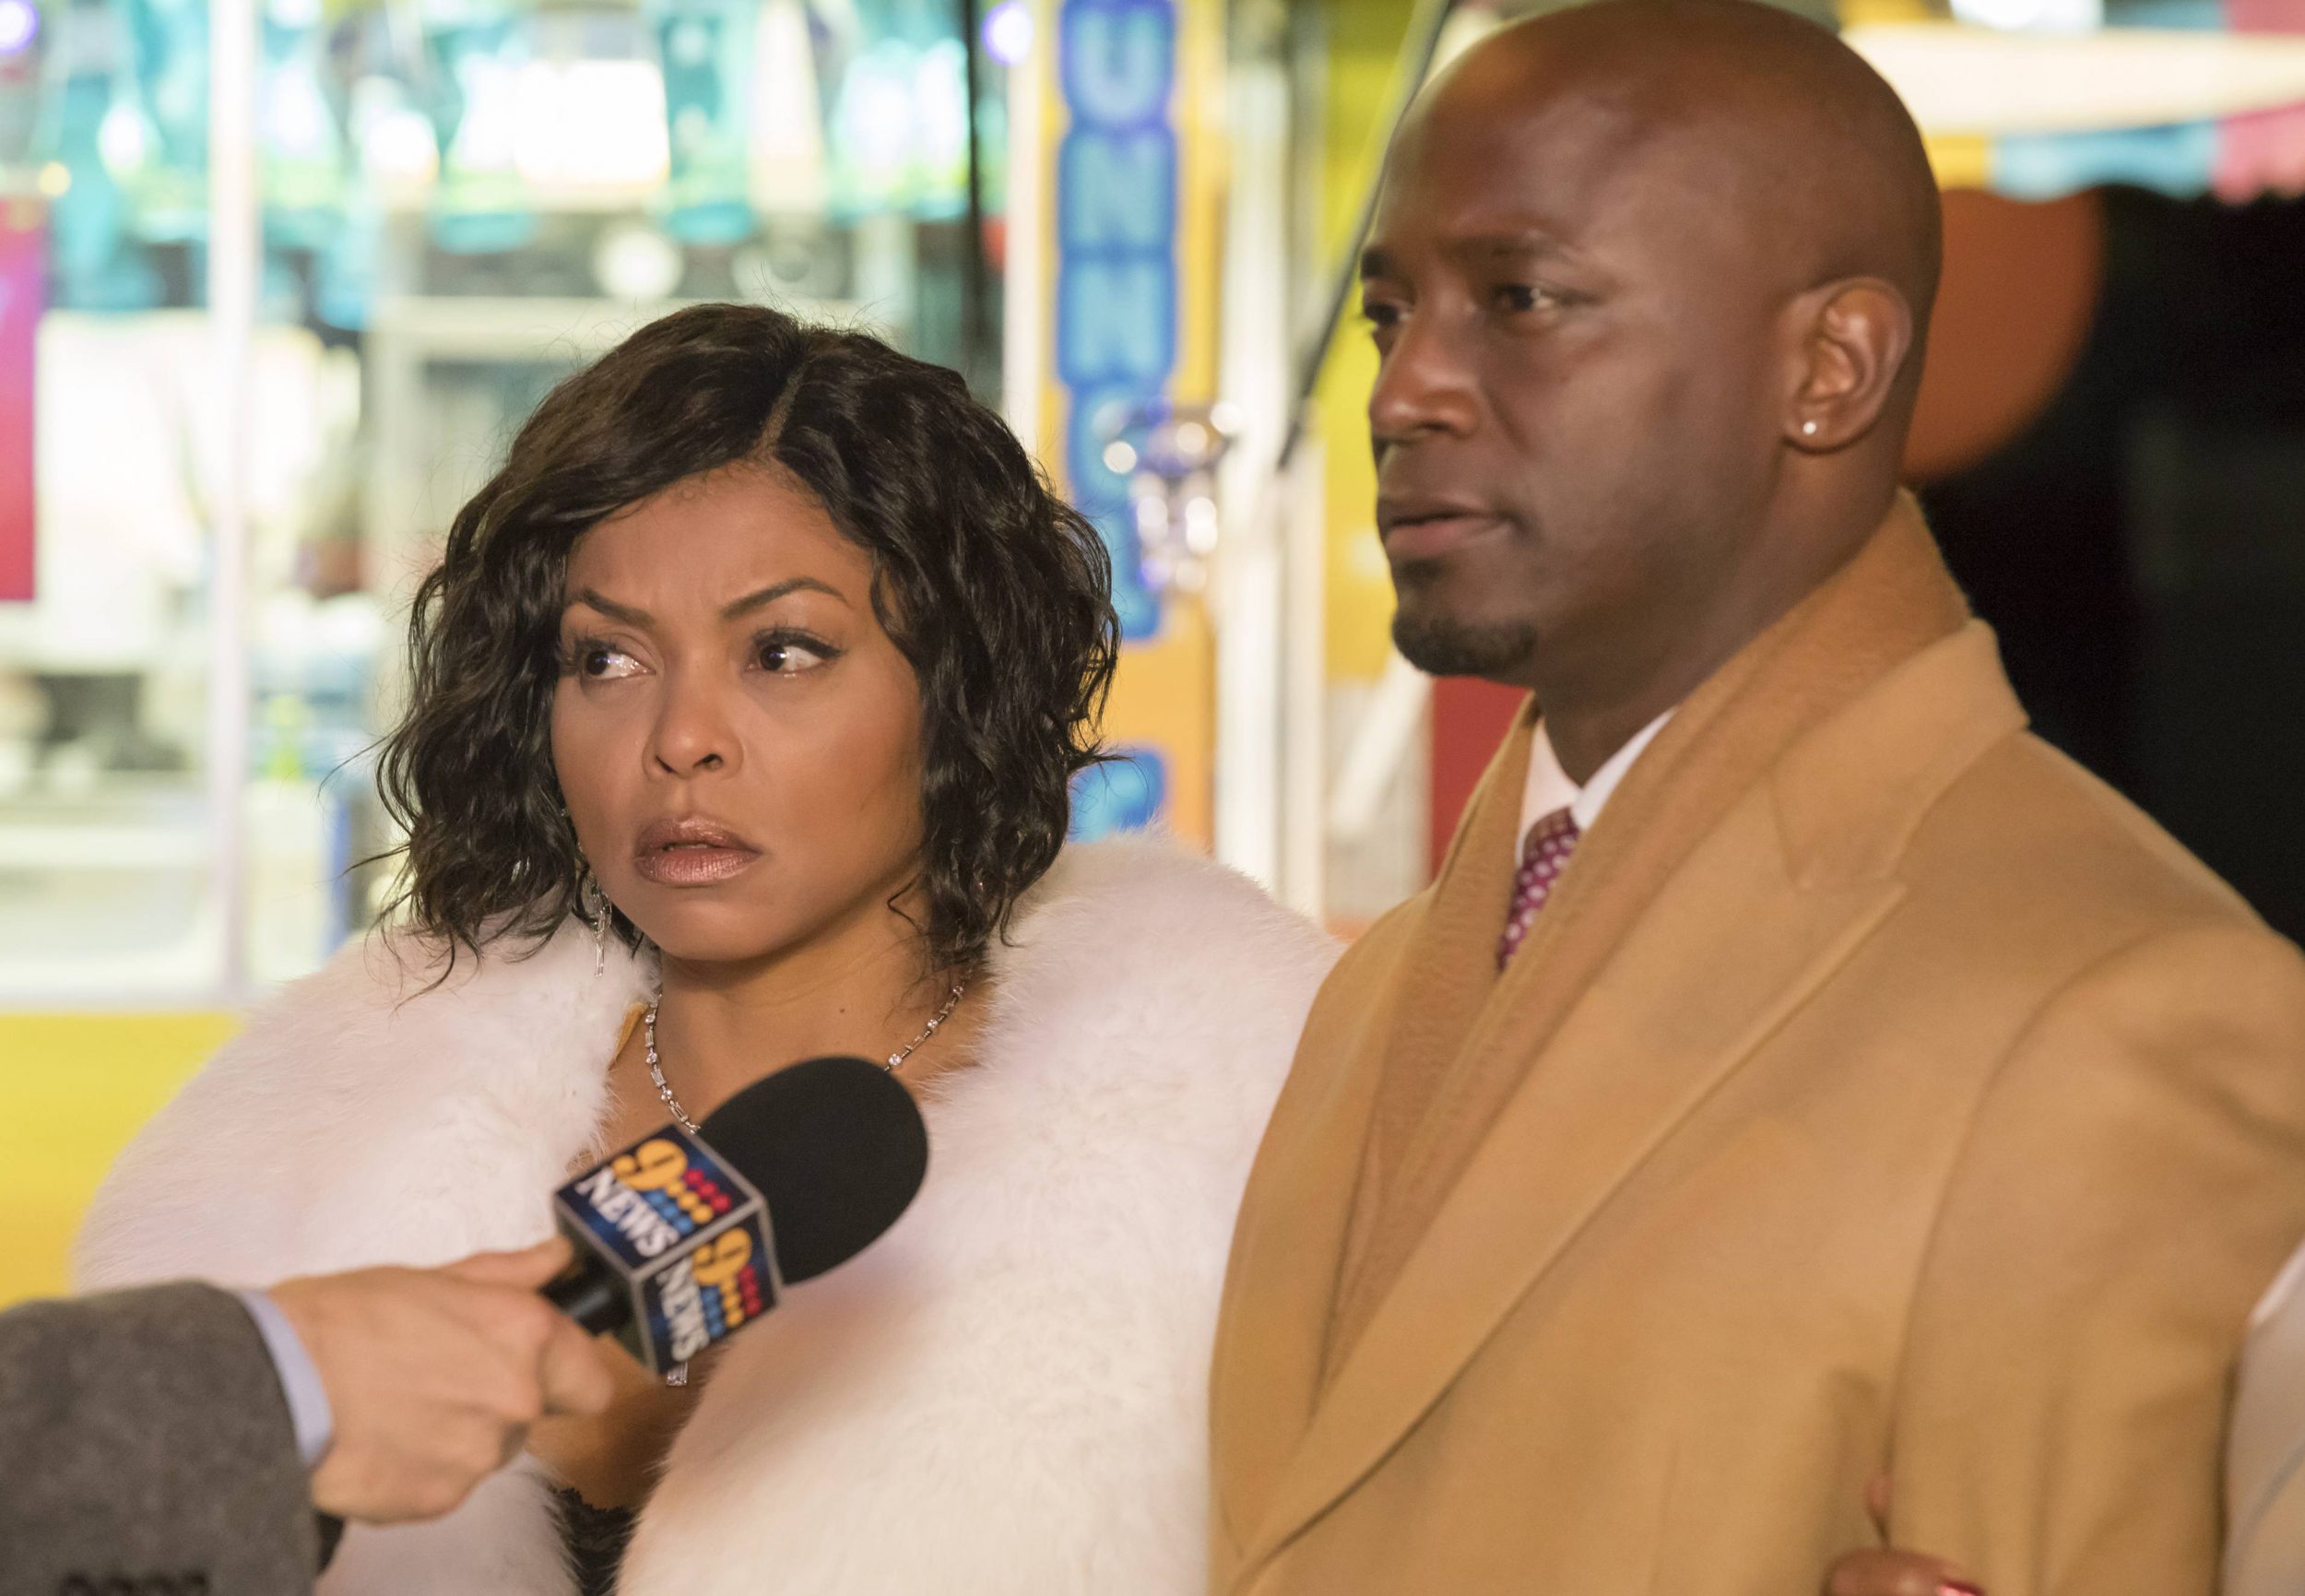 EMPIRE: Pictured L-R: Taraji P. Henson and guest star Taye Diggs in the "A Furnace For your Foe" fall finale episode of EMPIRE airing Dec. 14 (8:00-9:00 PM ET/PT) on FOX. ©2016 Fox Broadcasting Co. CR: Chuck Hodes/FOX